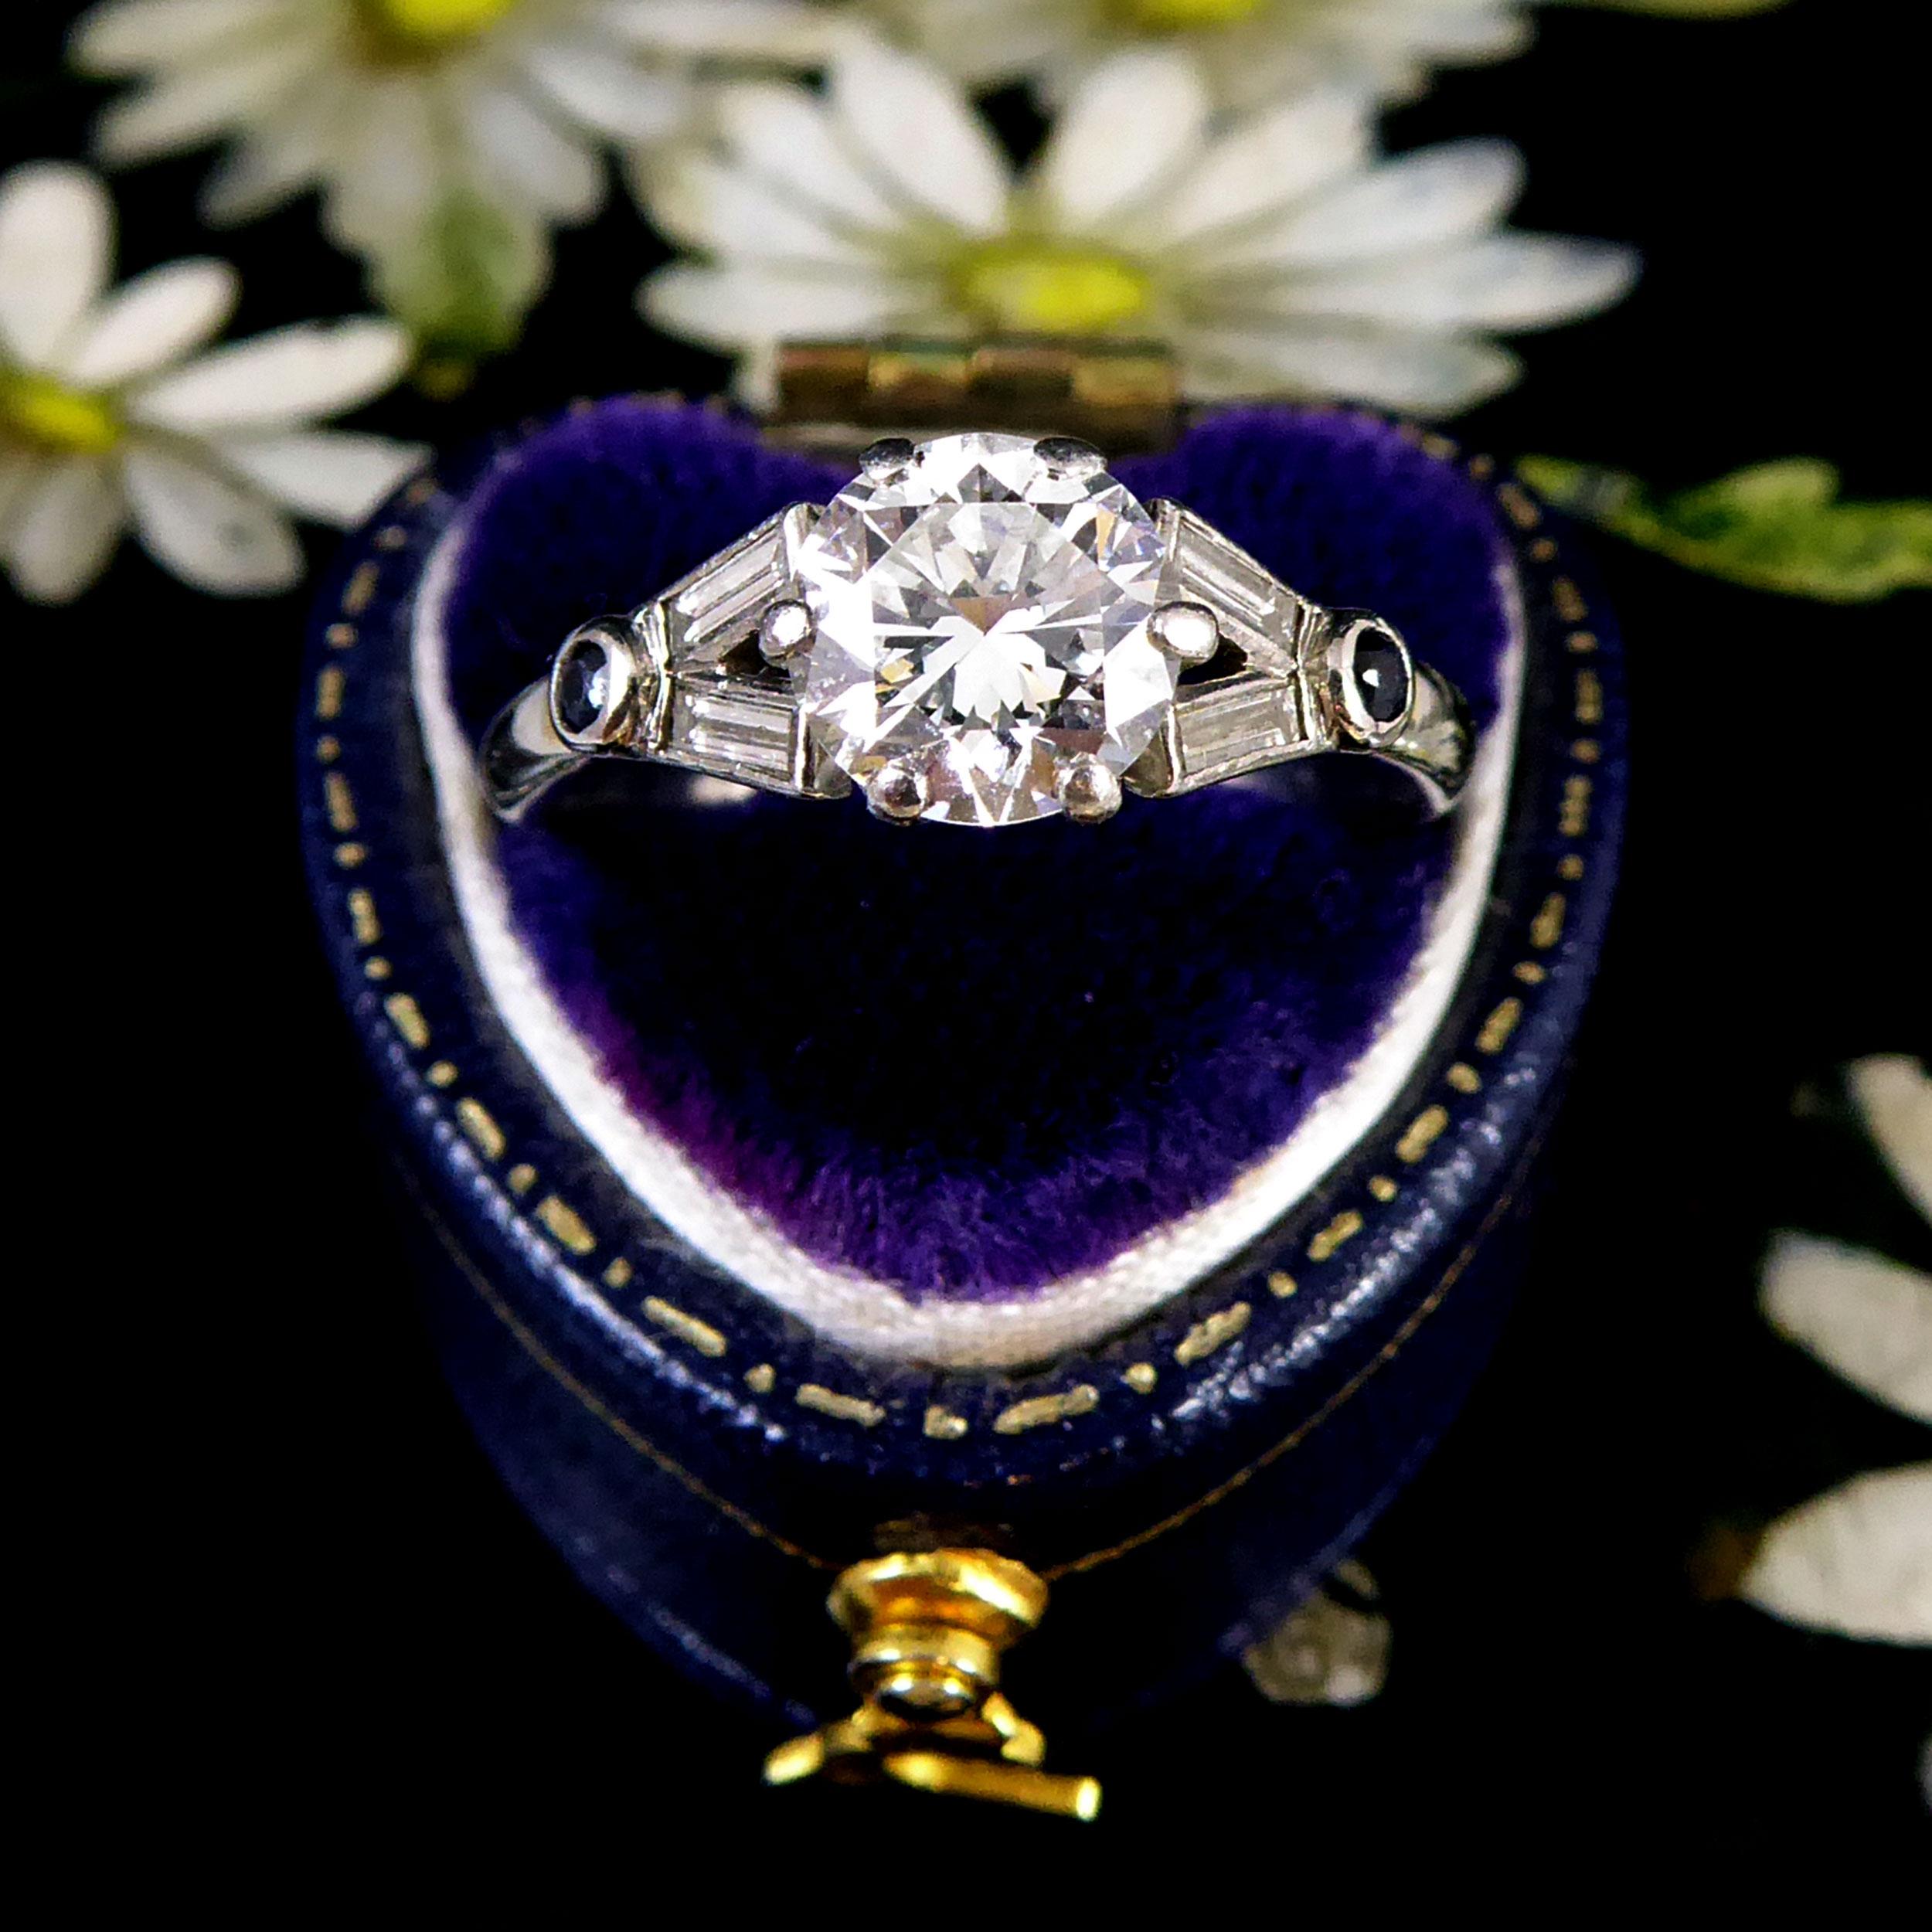 Round Cut Art Deco 1.10 Carat Diamond Ring with Baguetee Diamond and Sapphire Shoulders